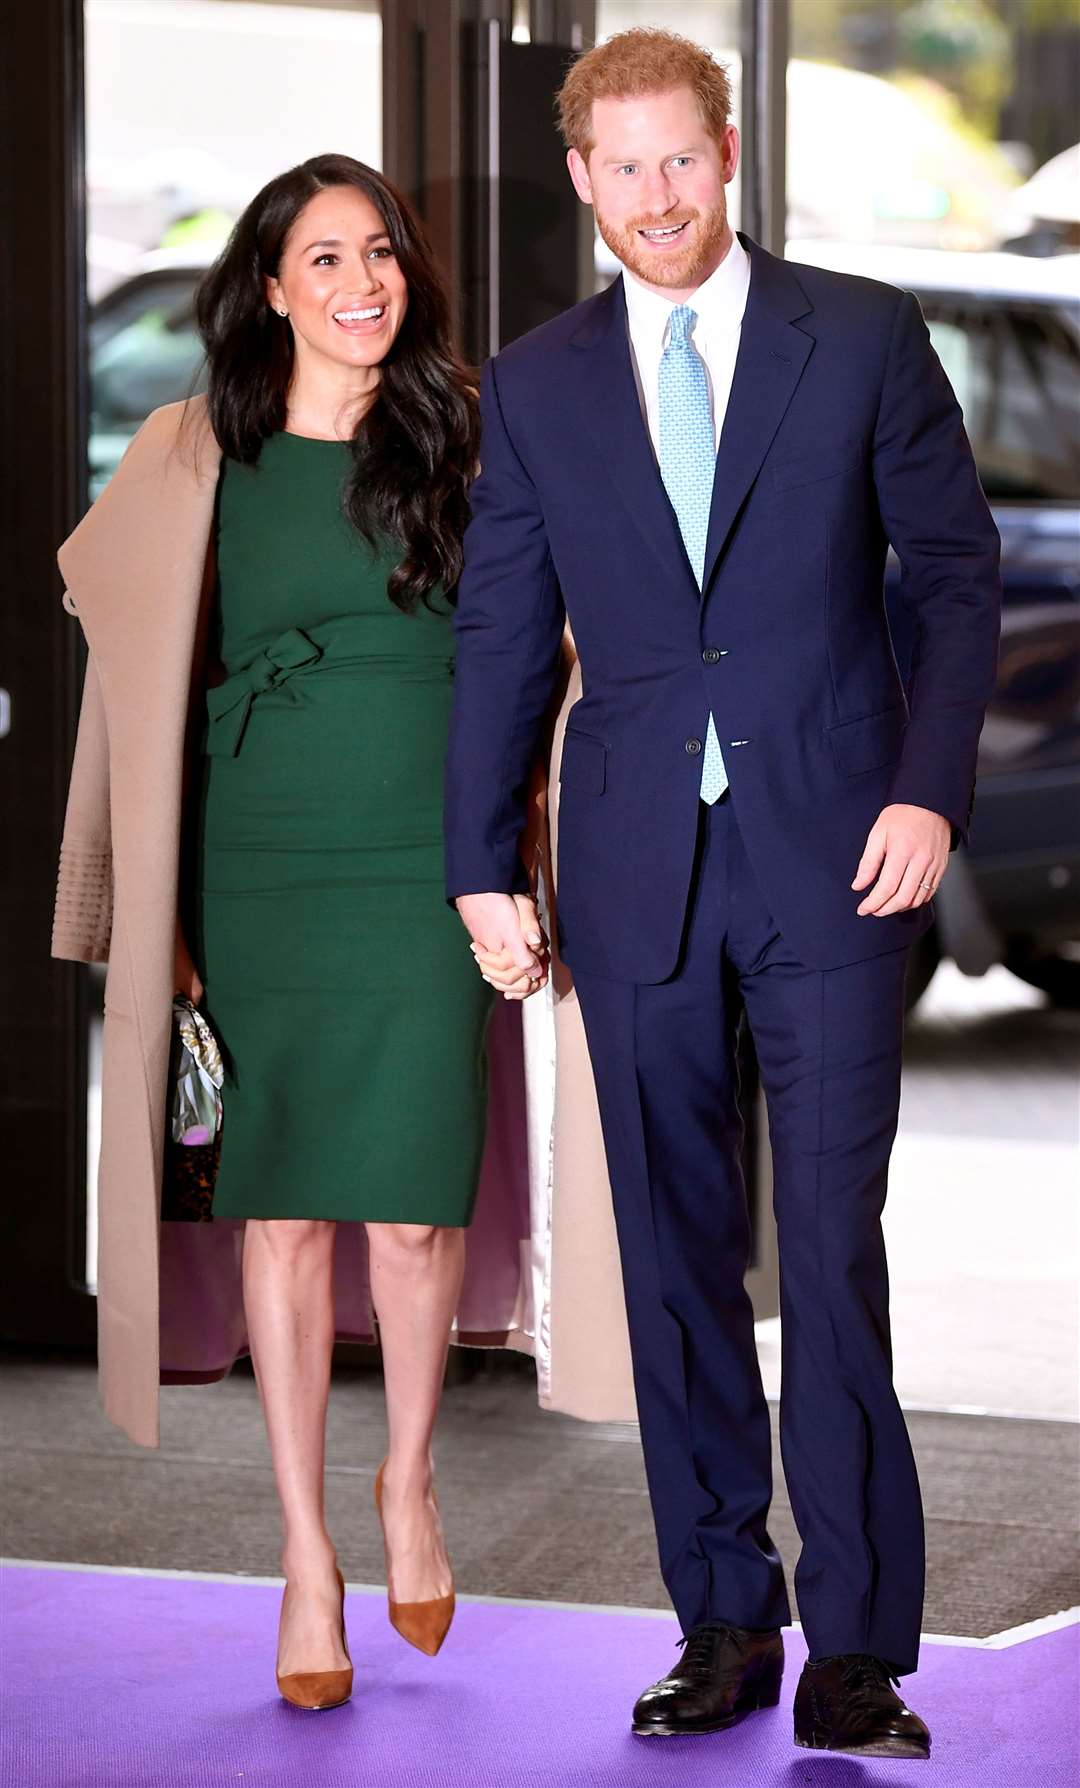 The Duke and Duchess of Sussex arriving for a previous WellChild Awards in London (Toby Melville/PA)